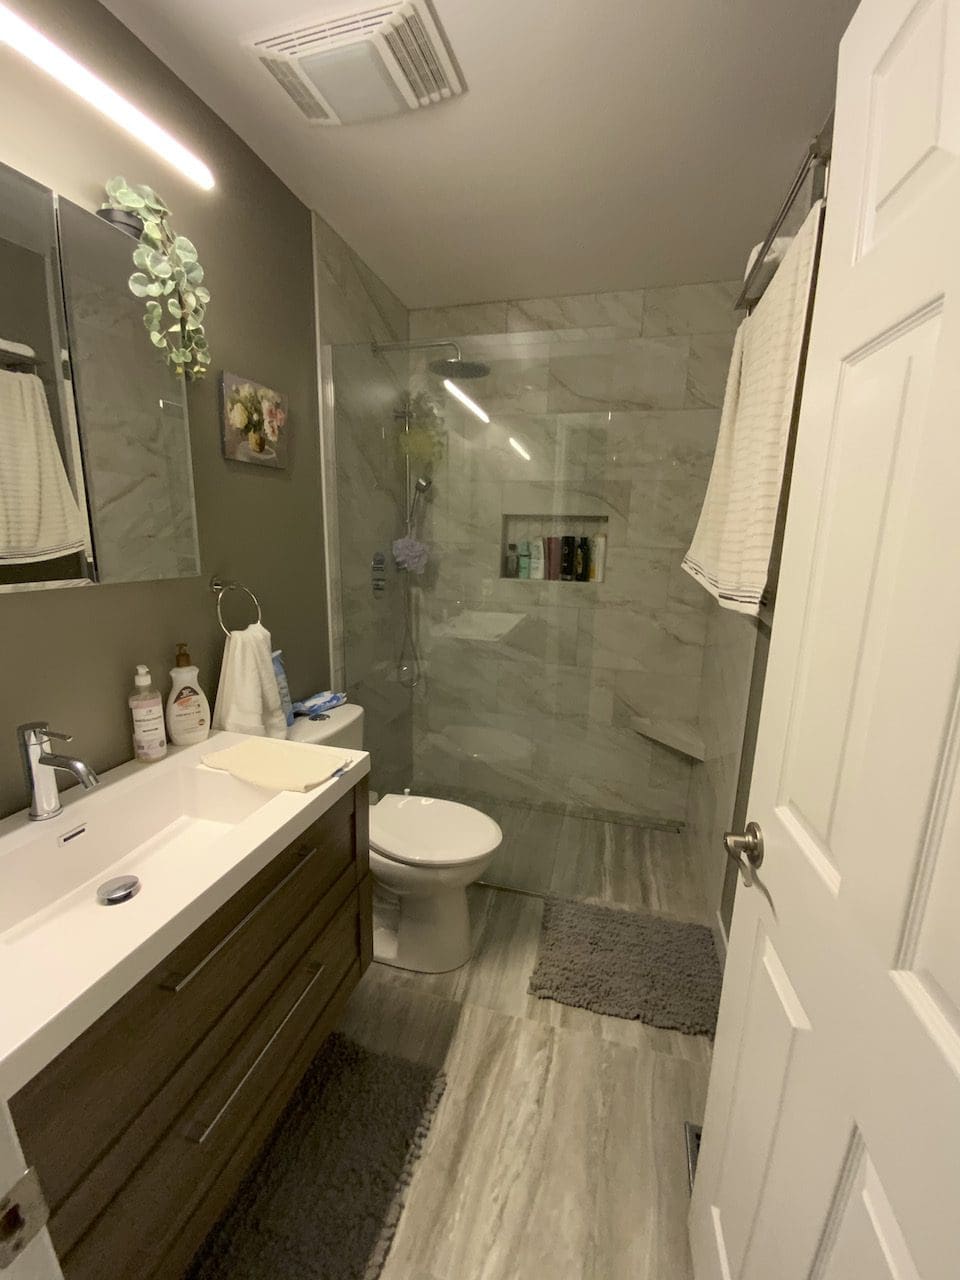 A hallway bathroom remodel featuring marble tile, a wooden floating vanity, and a curbless shower.